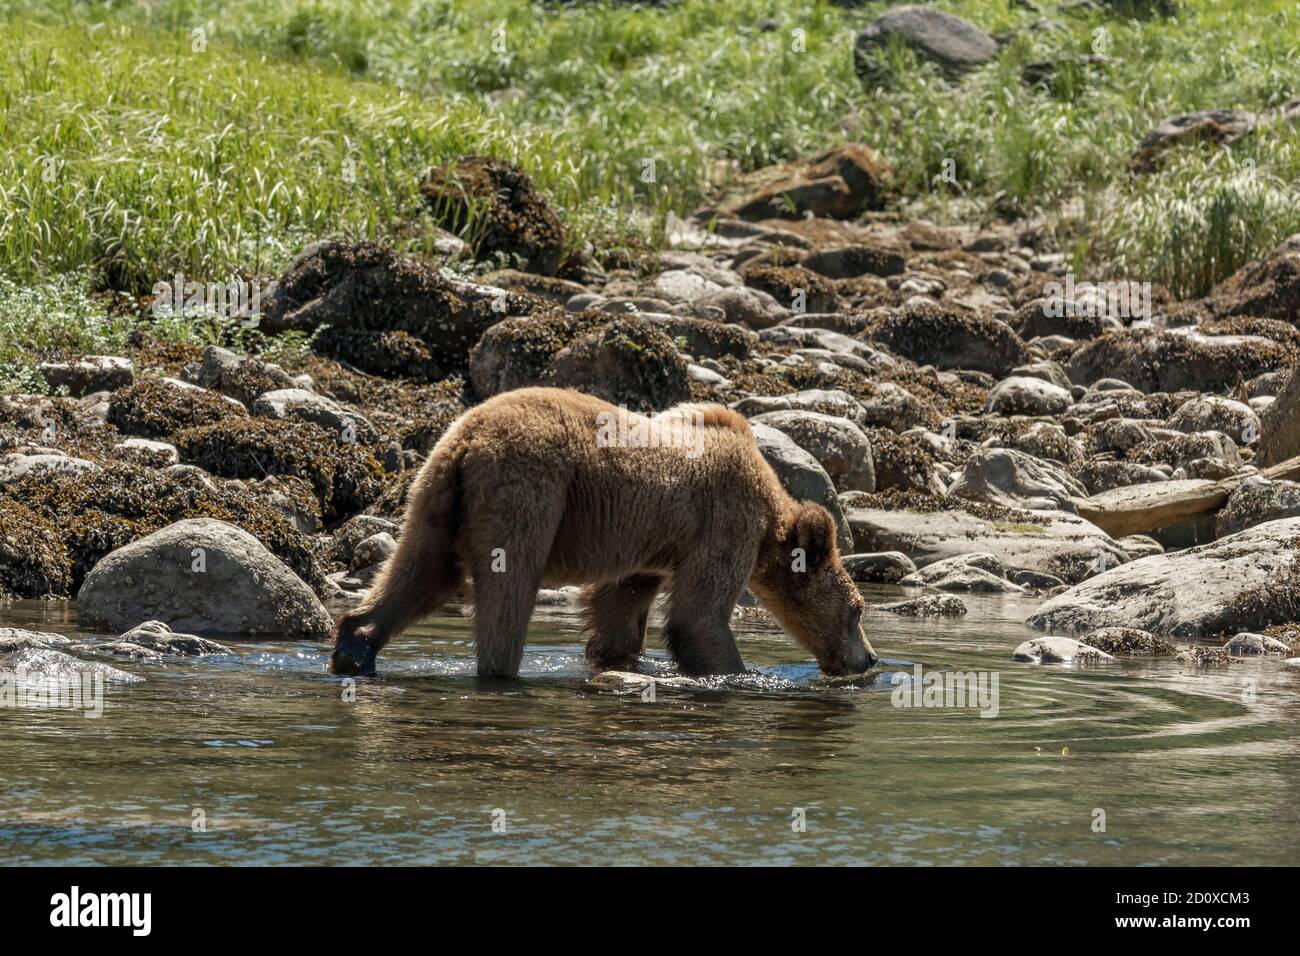 Grizzly cub with nose to the water, walking by rockweed at low tide, Khutzeymateen Inlet, BC Stock Photo